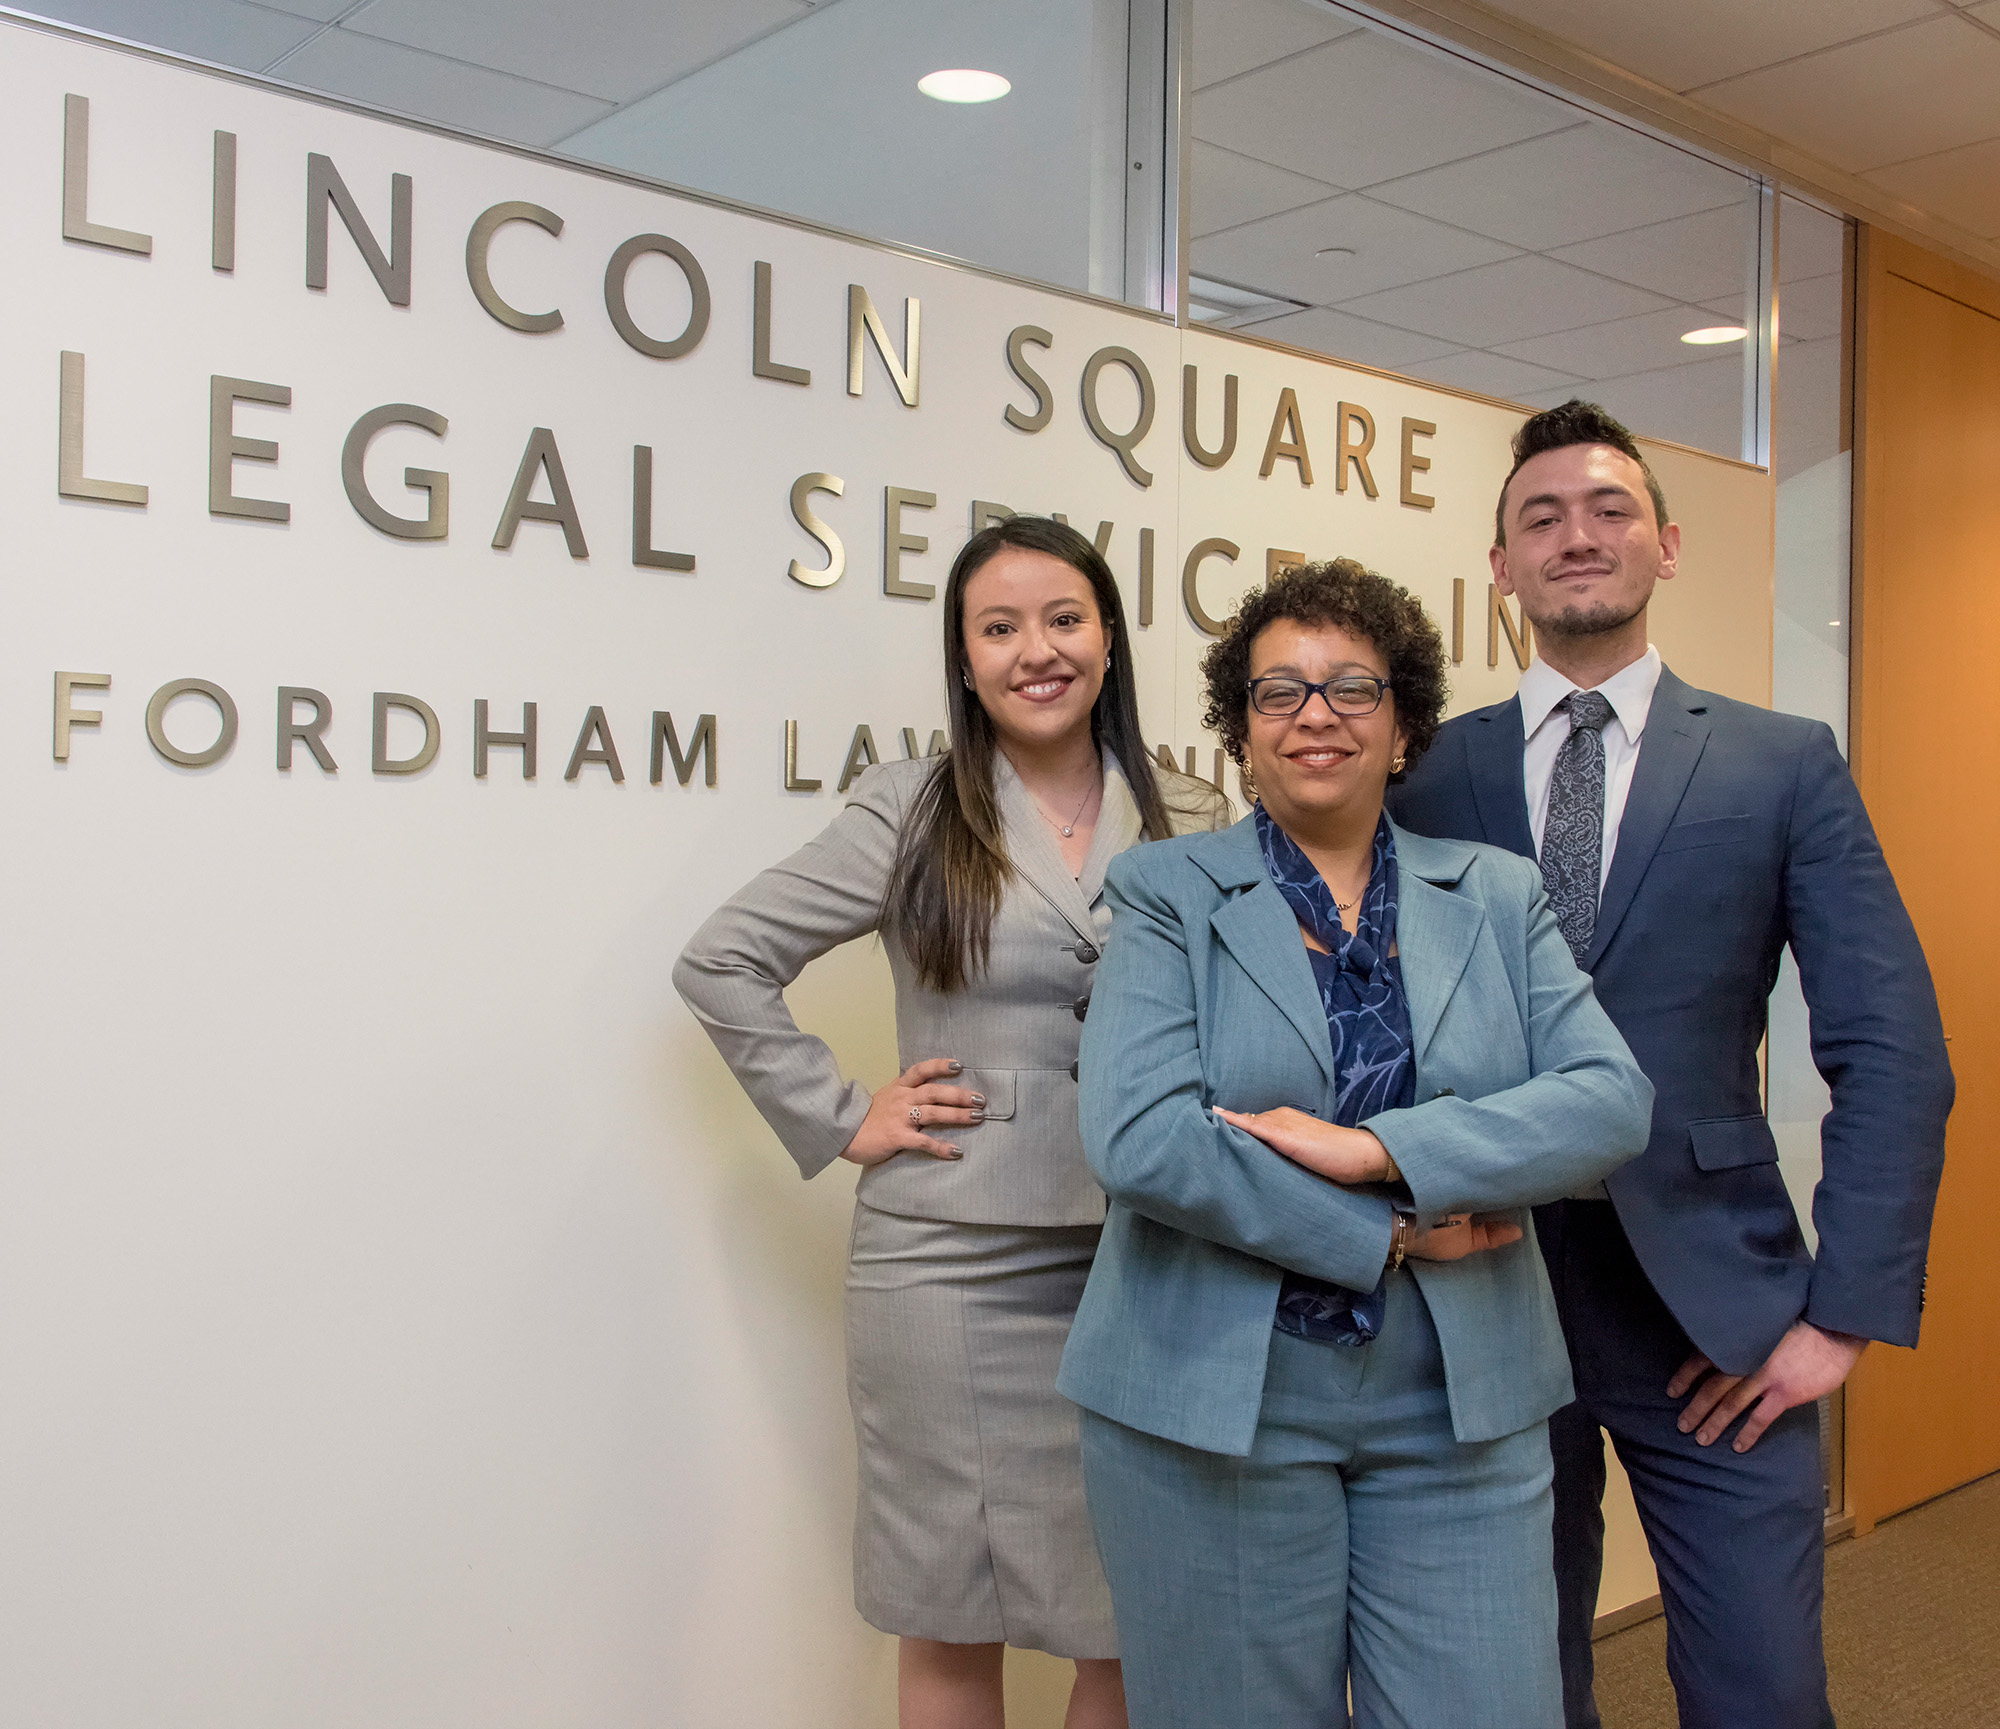 Lincoln Square Legal Services Sign and students